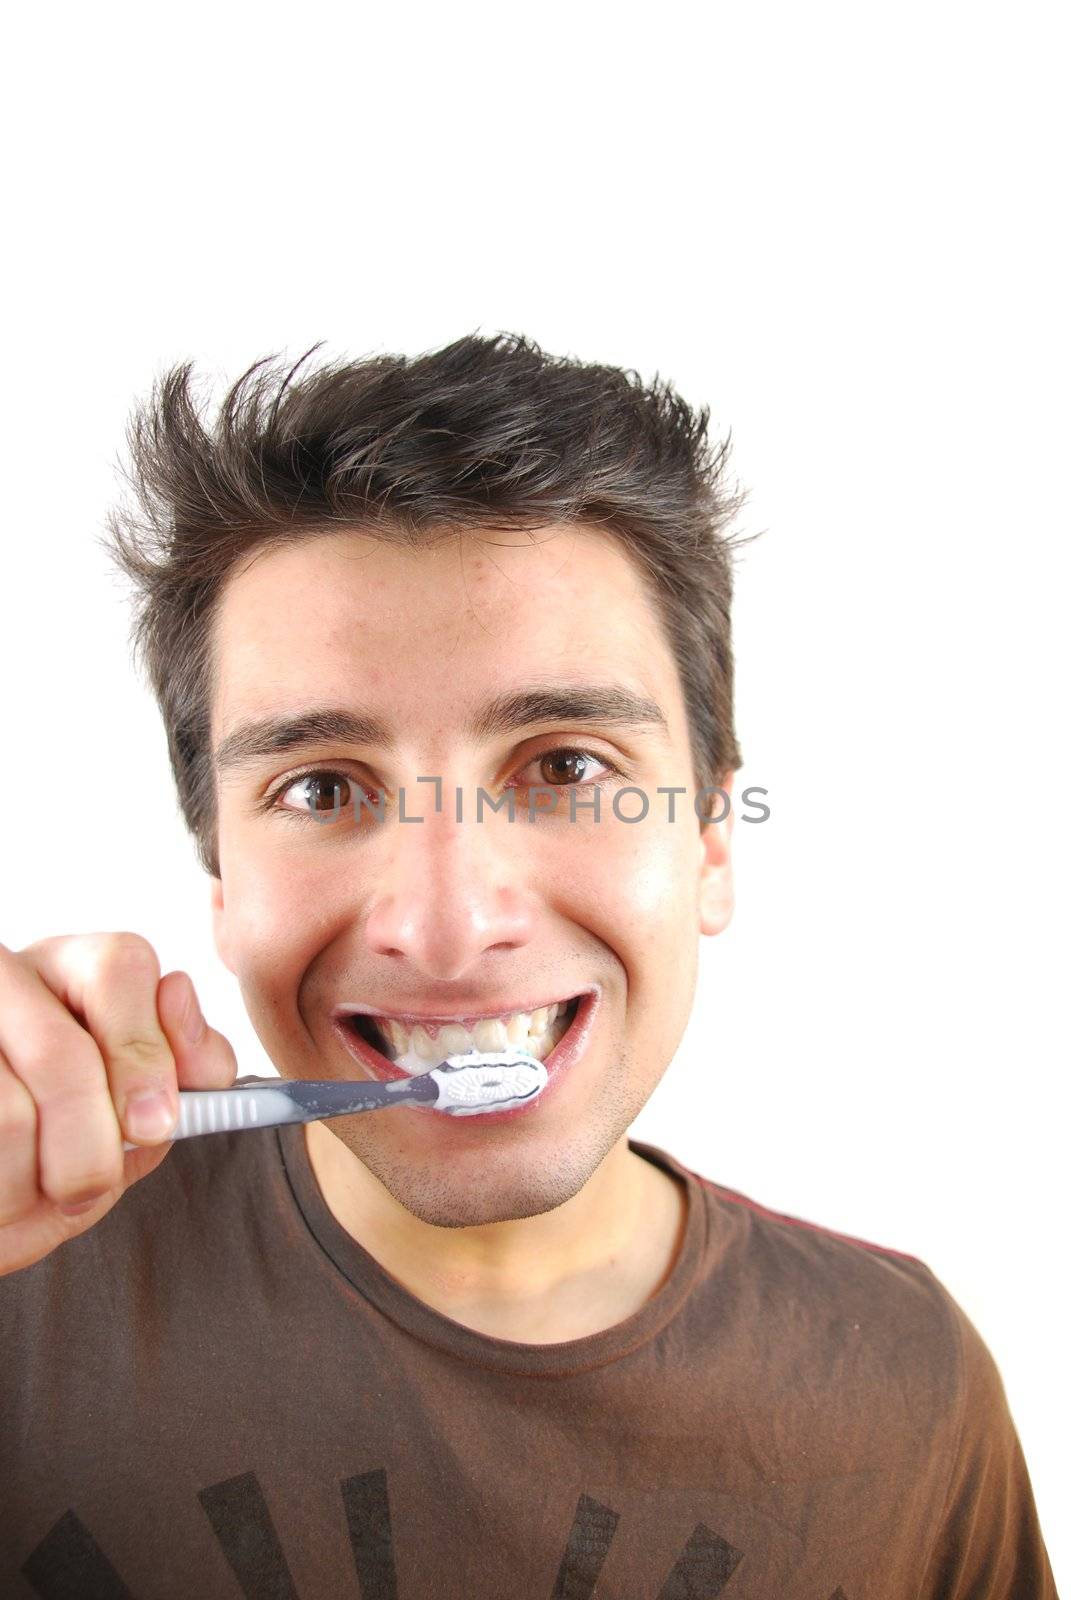 cheerful young man is washing teeth over white background
